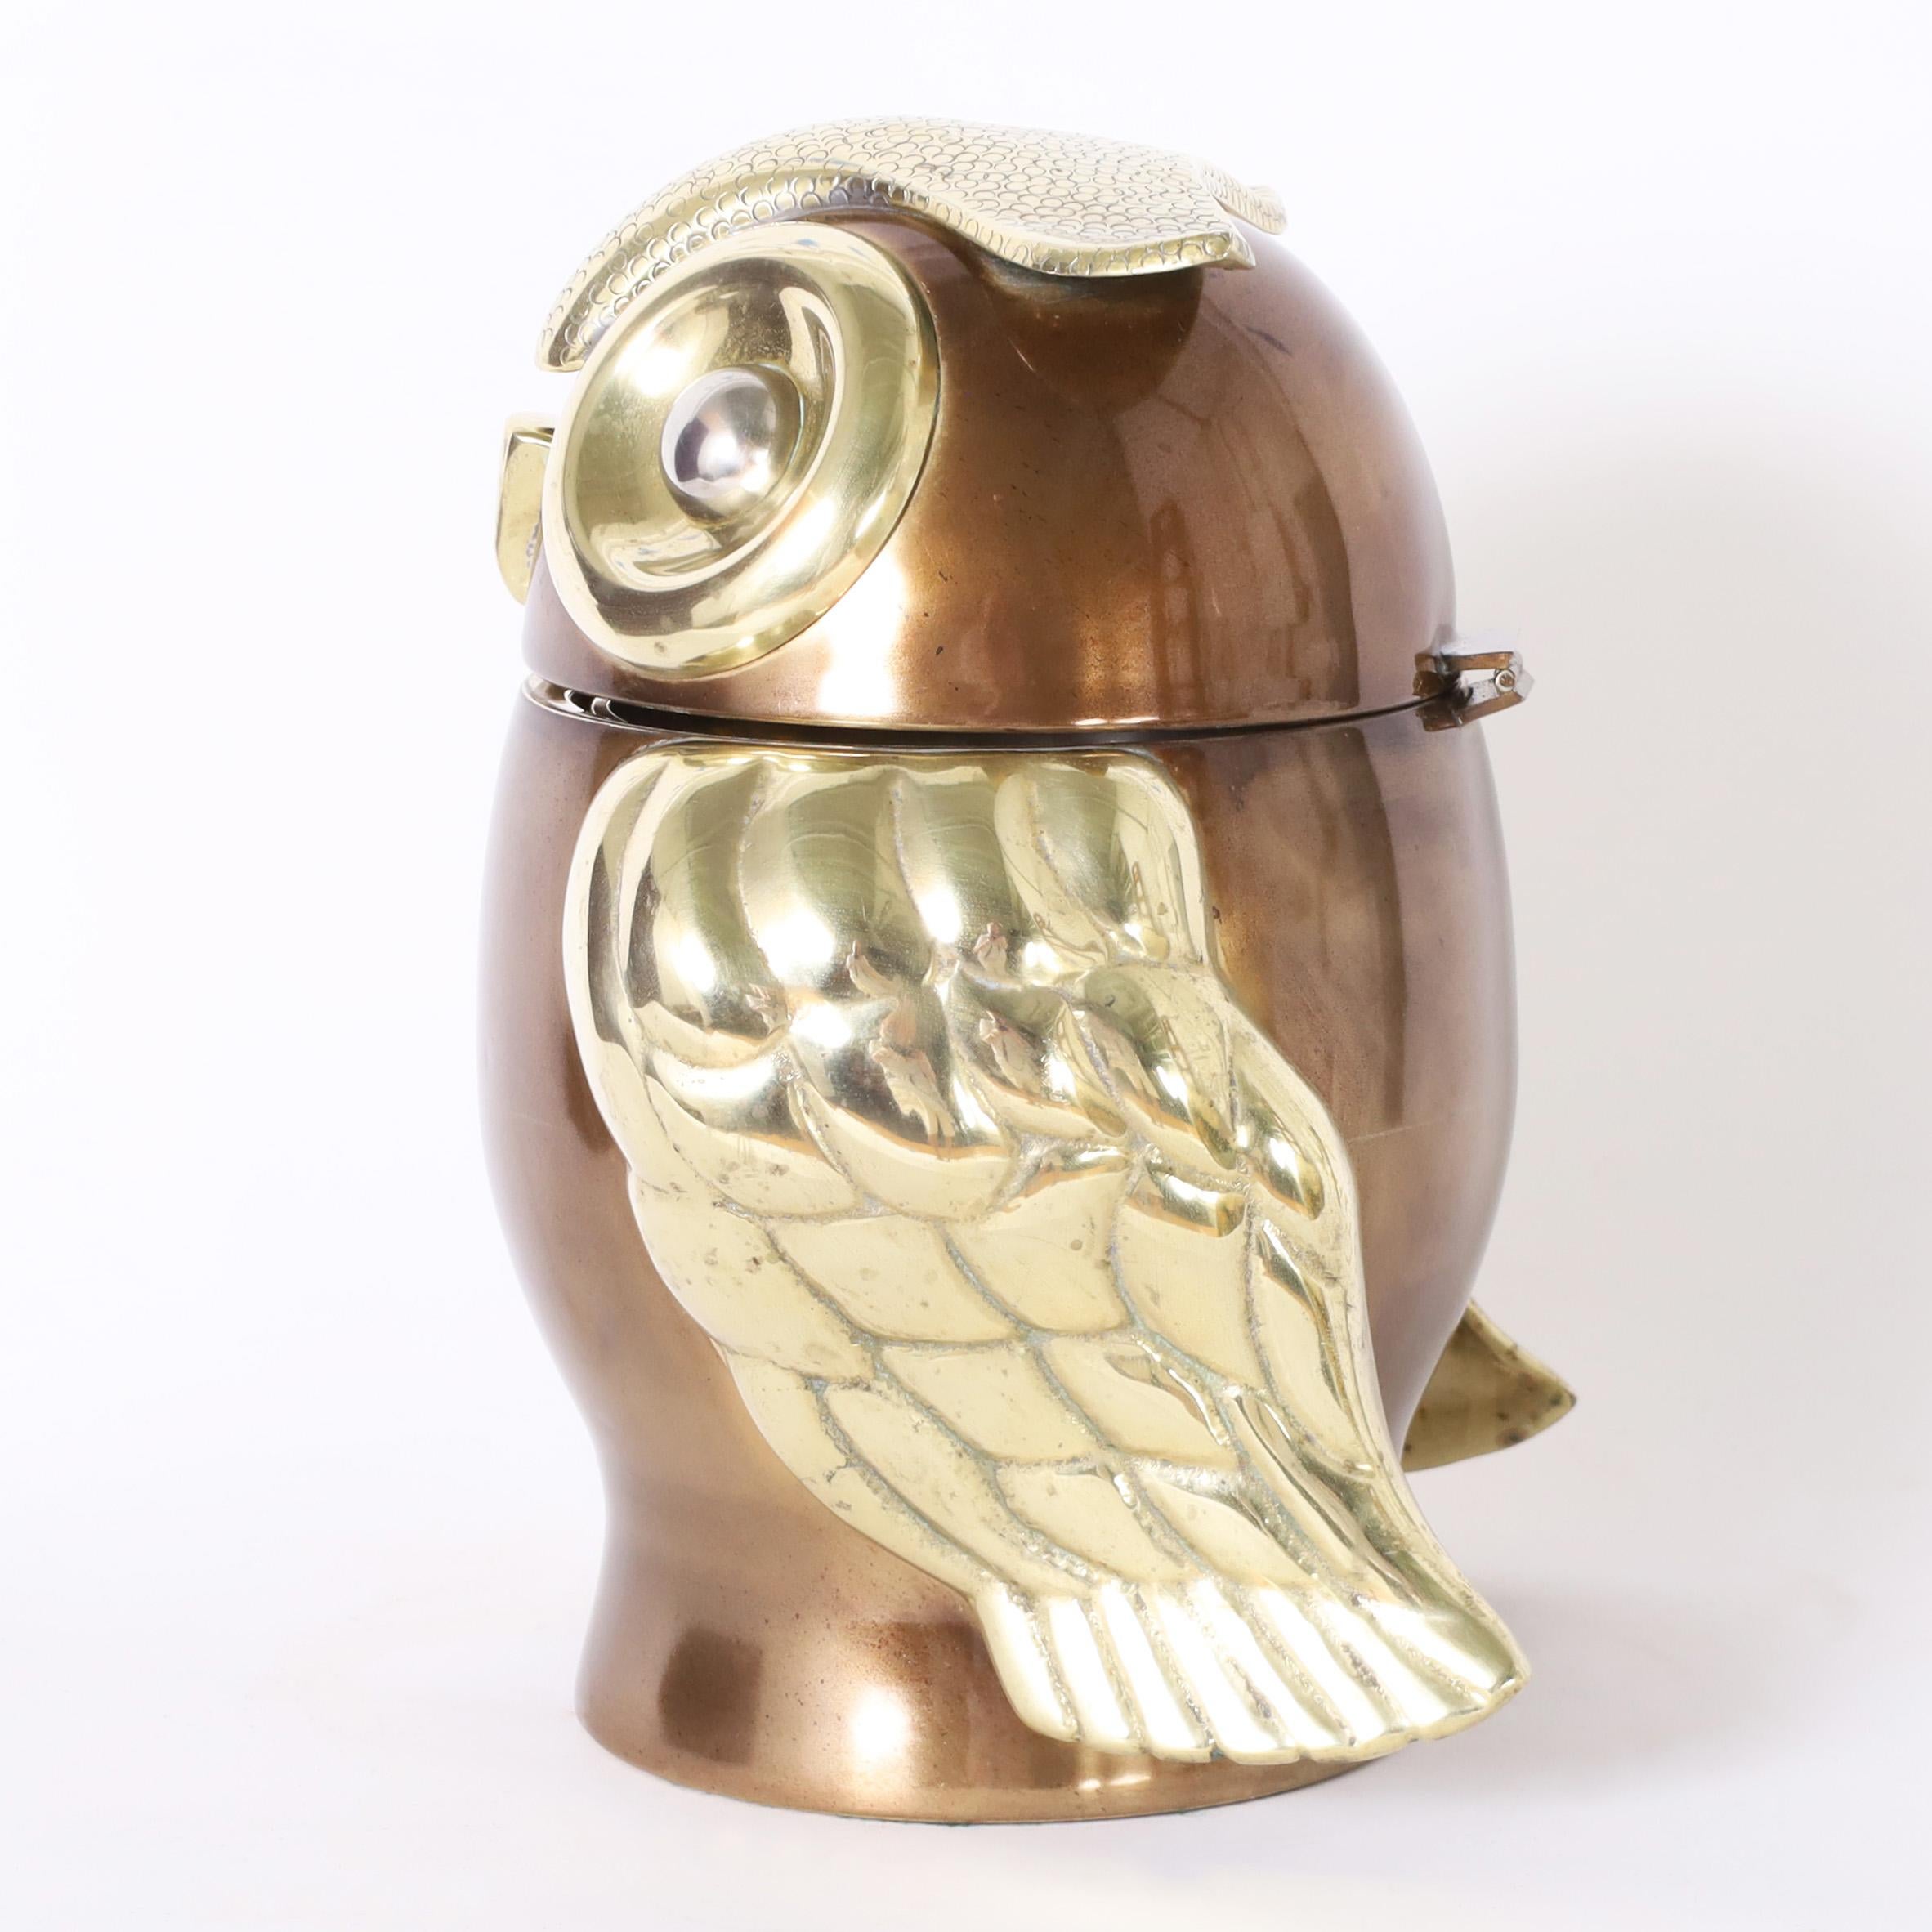 Striking vintage ice bucket with a stylized owl form hand crafted in brass, polished and with a patina, having silver plate eyes. Stamped Indugarcia Columbia on the bottom.